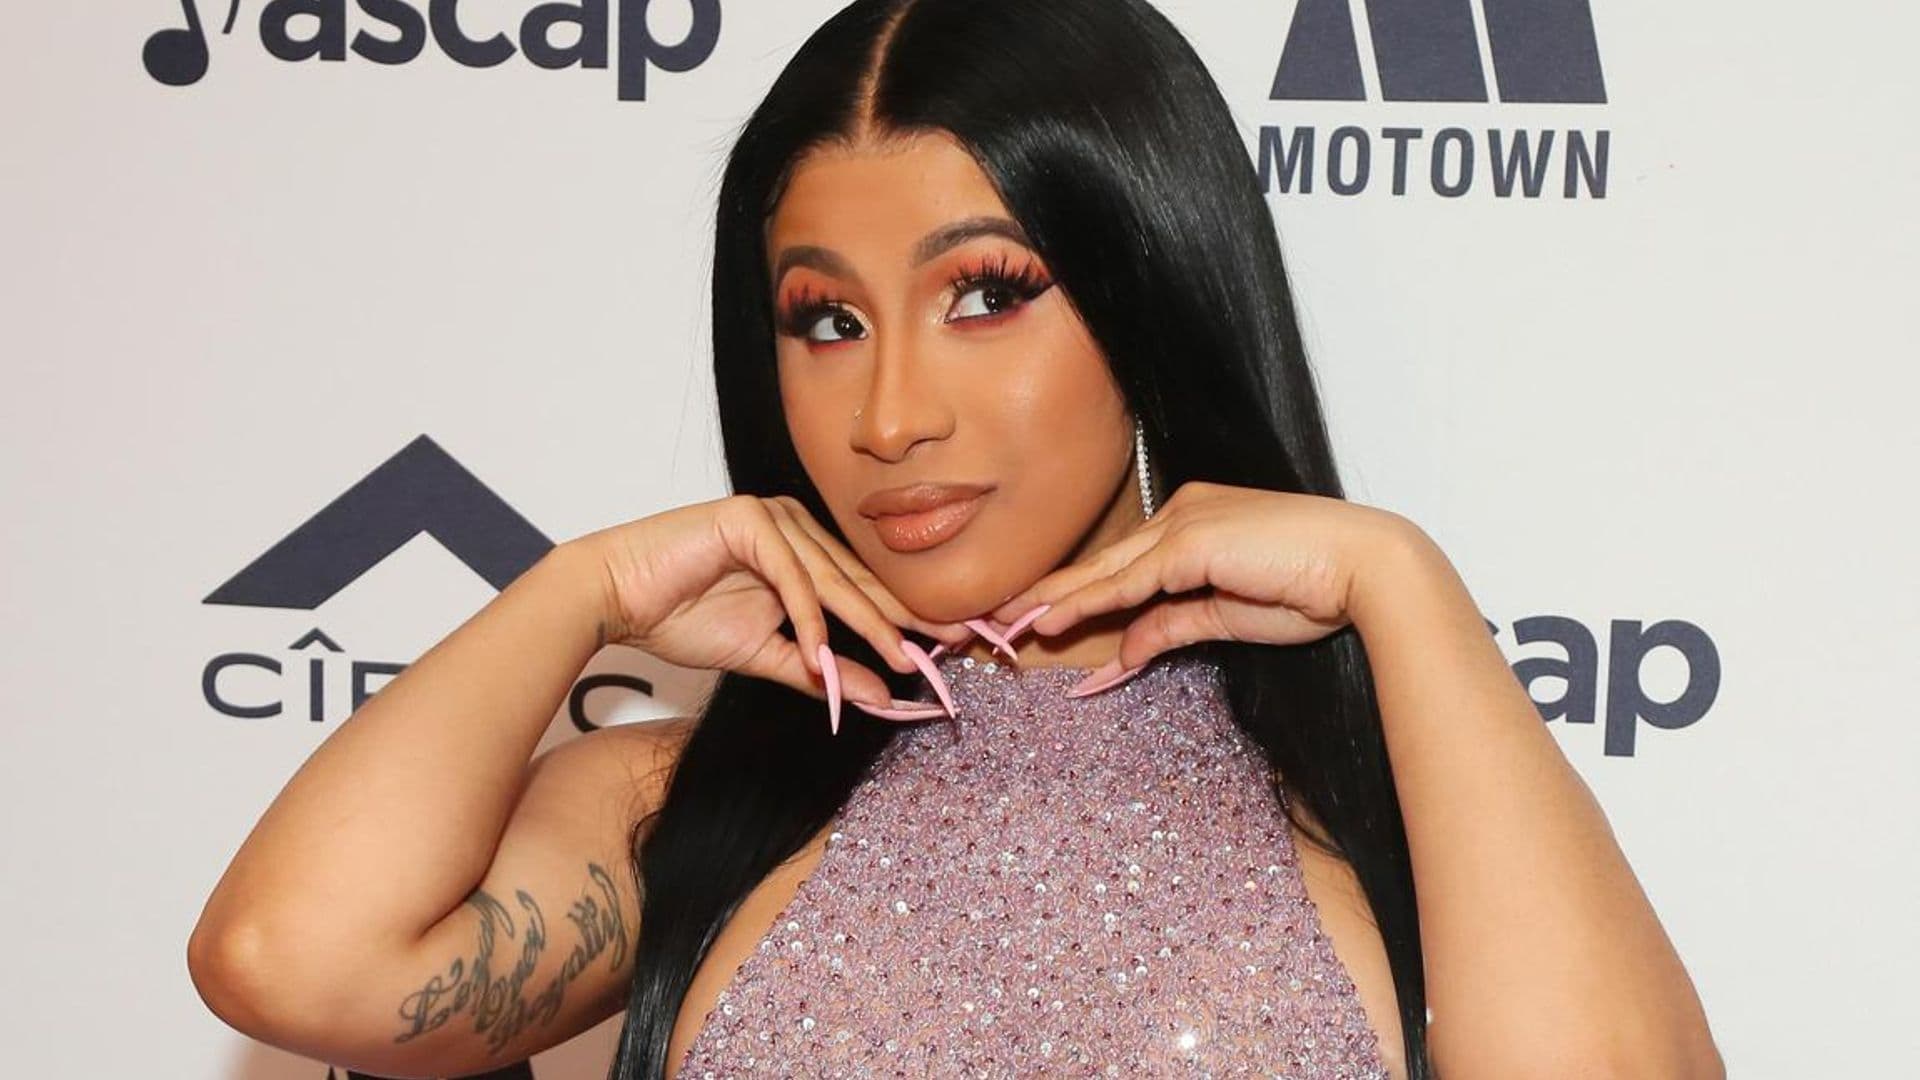 Cardi B reacts to being ‘cancelled’ in emotional video